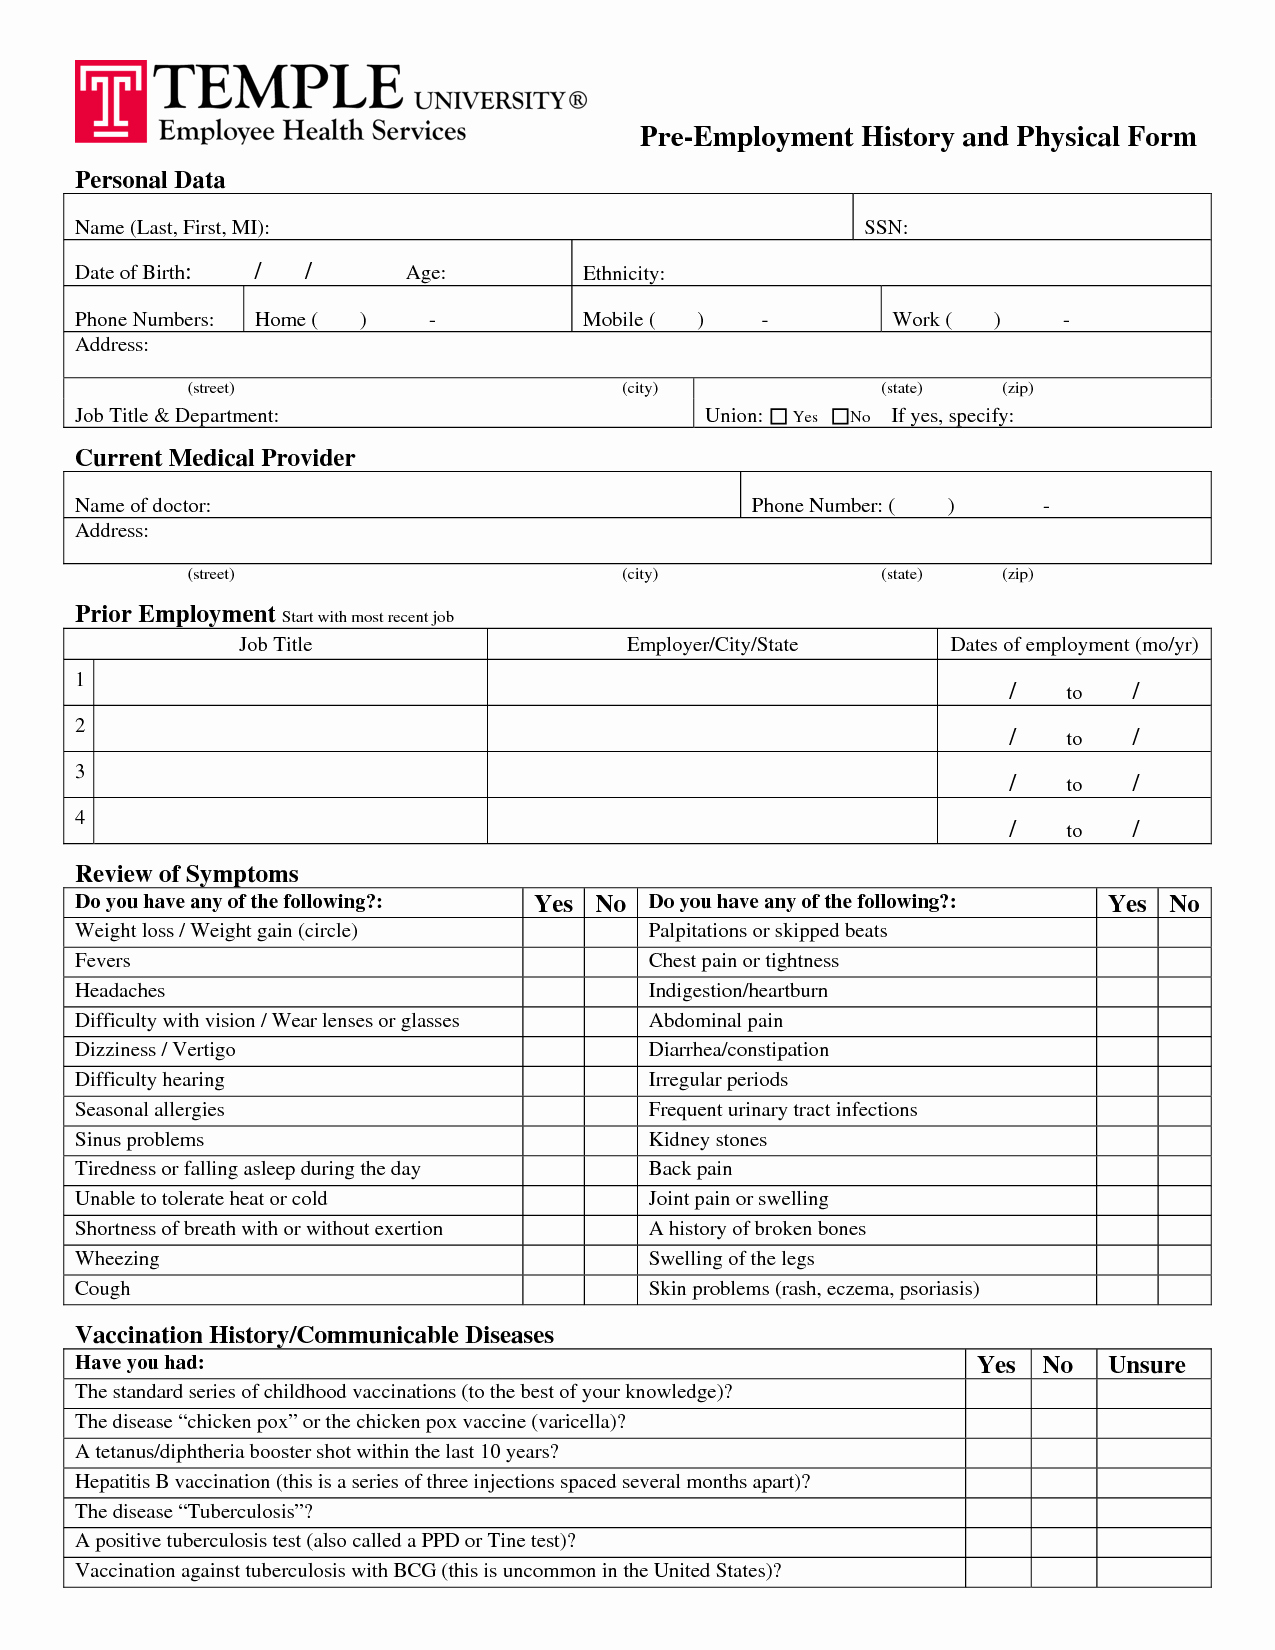 Pre Employment Physical form Template Beautiful History Physical form Template Blank History and Physical